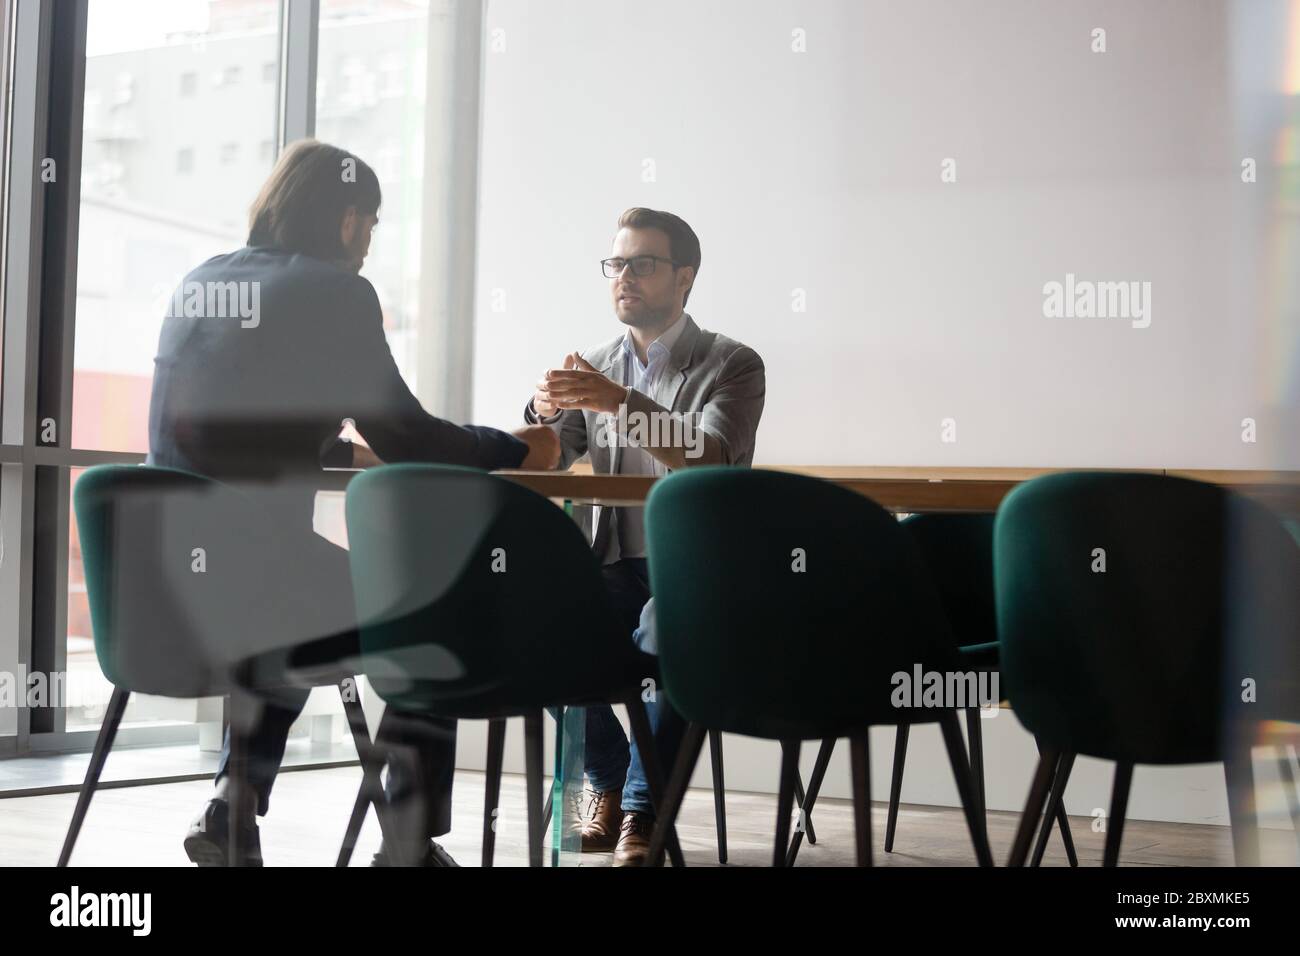 Behind glass wall two businessmen negotiating seated at boardroom desk Stock Photo